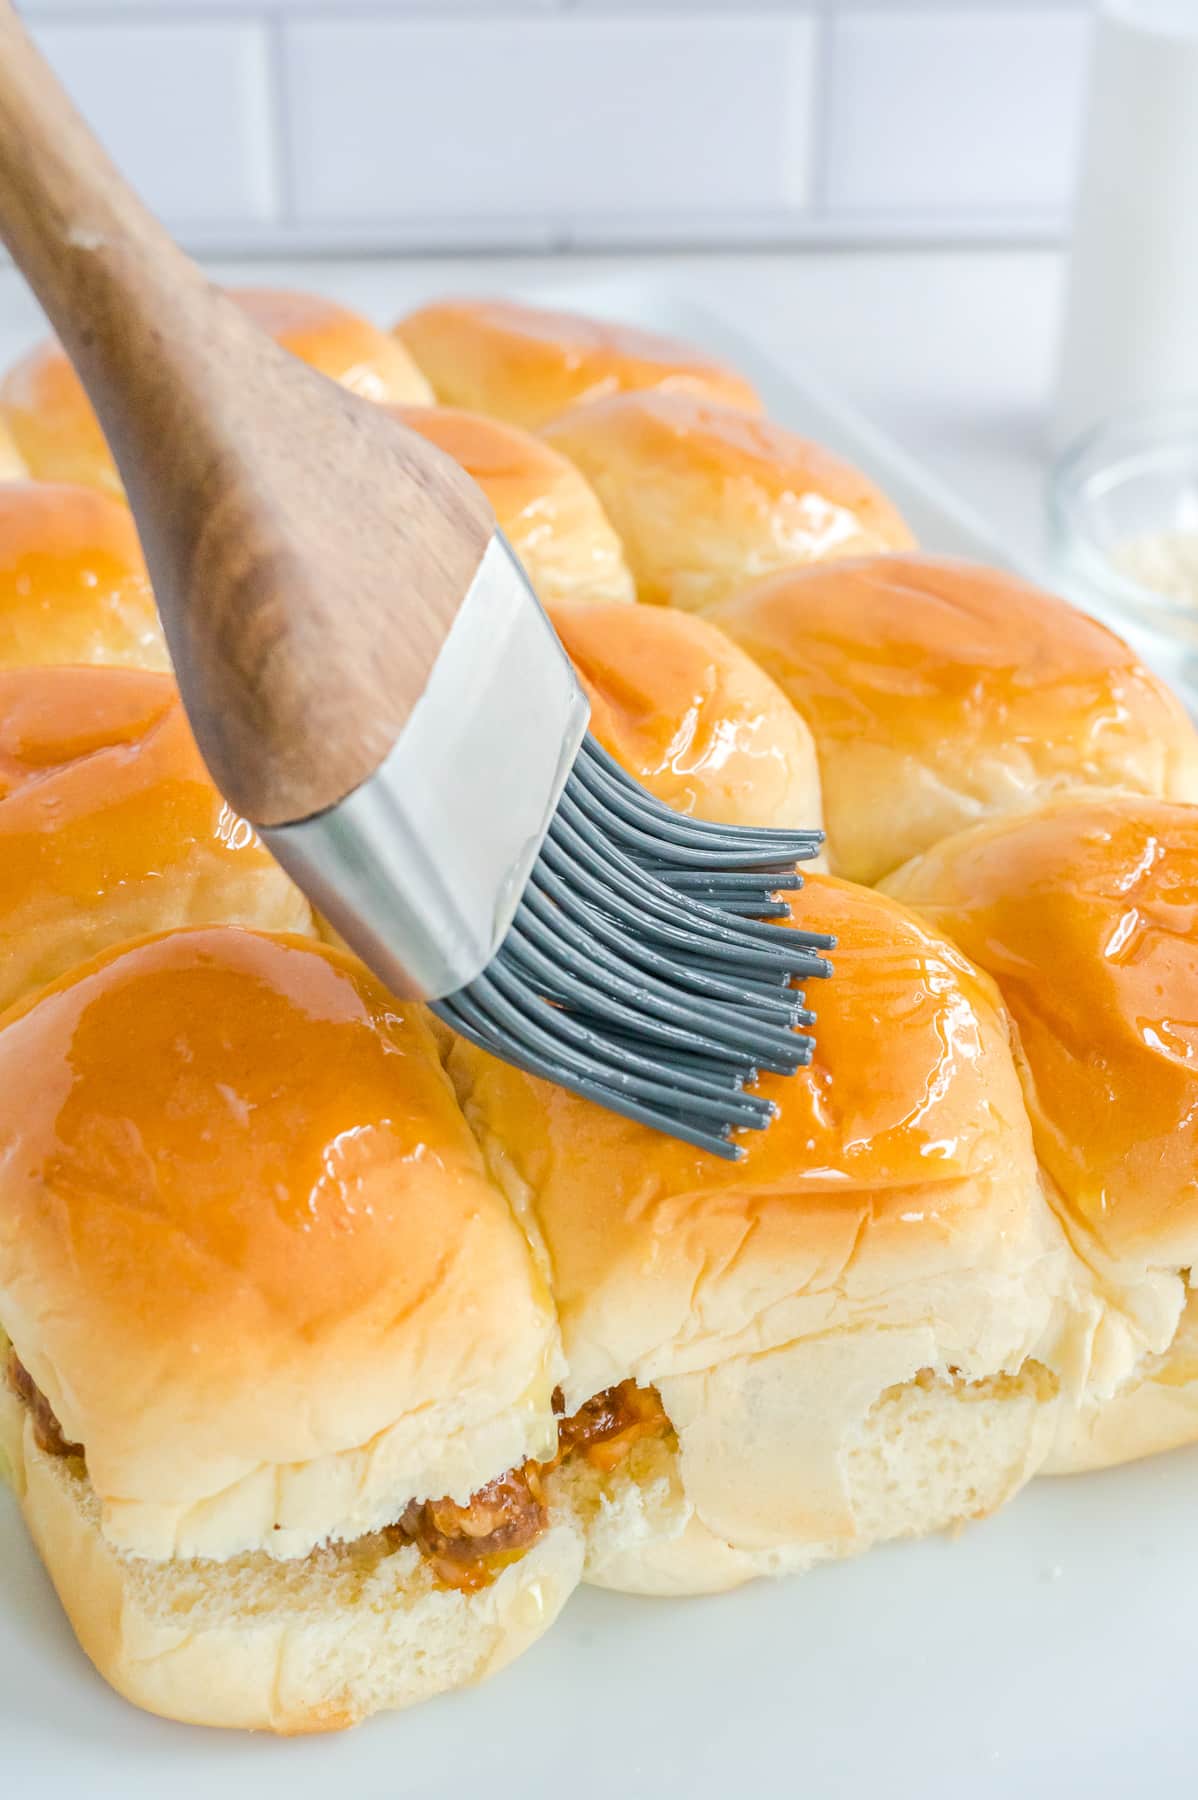 A silicone brush is being used to spread butter on a Hawaiian rolls from the side.